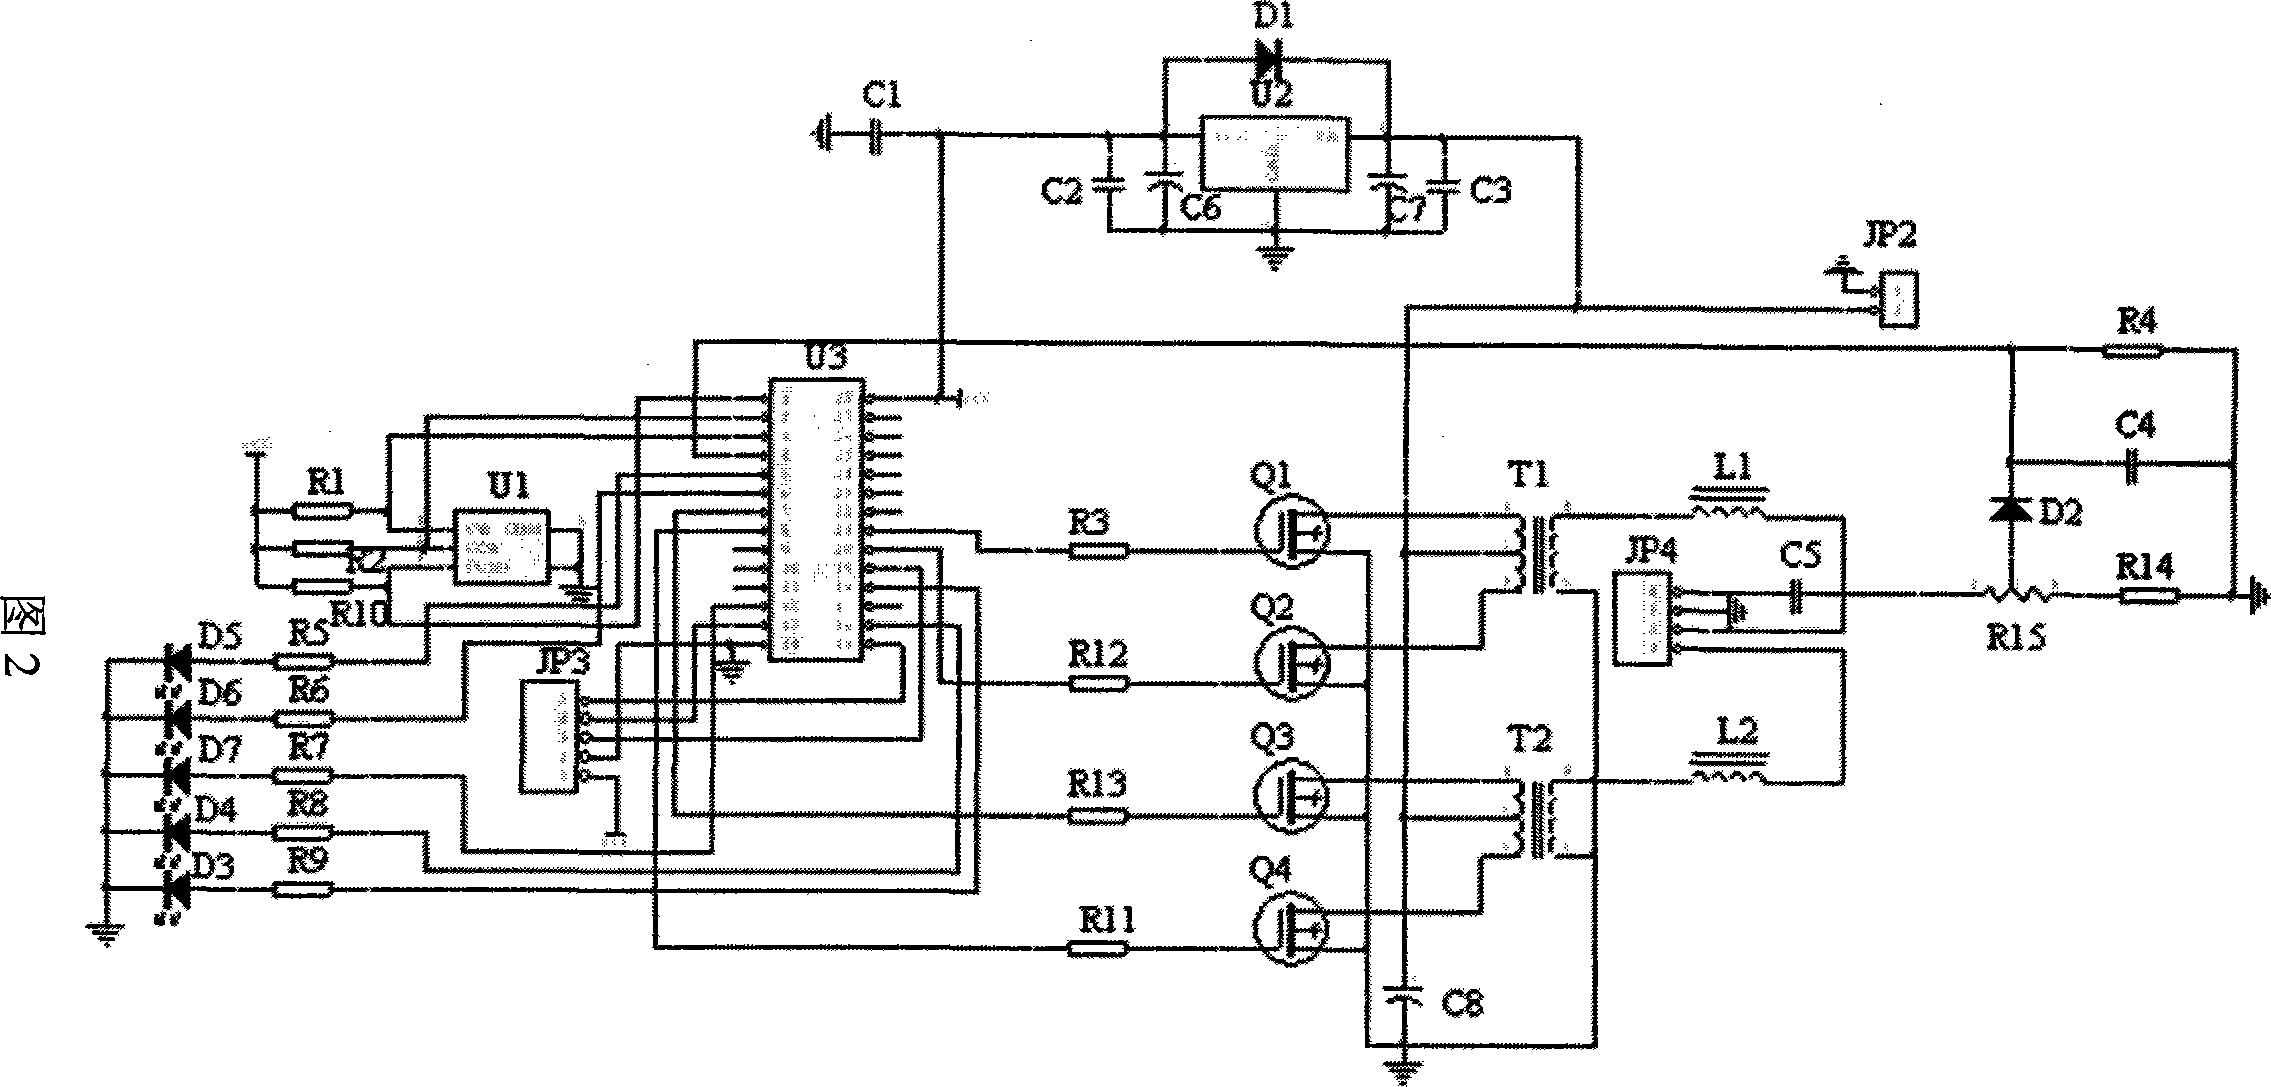 Ultrasound motor drive controller based on built-in system chip